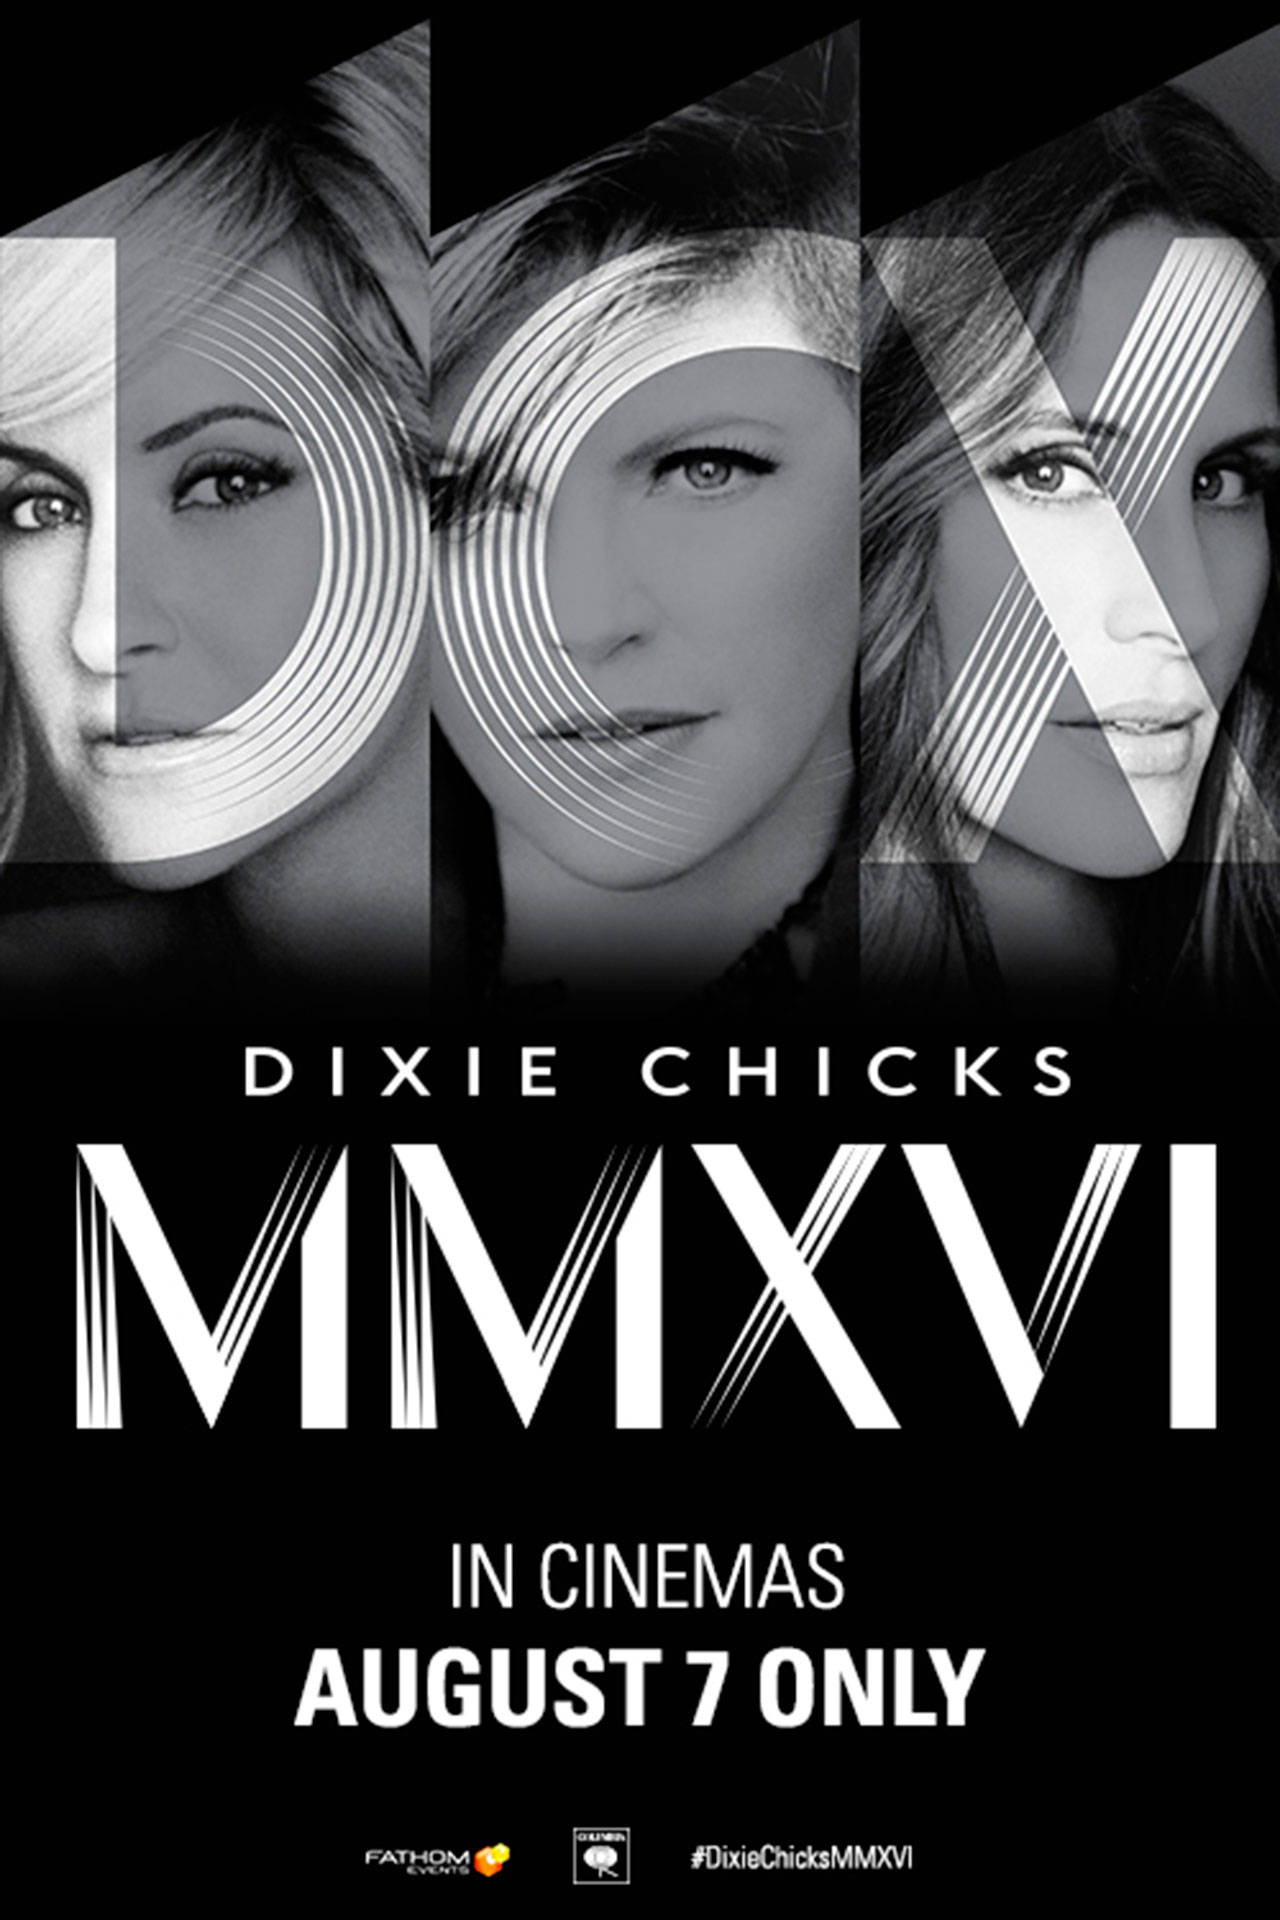 Image courtesy of Bainbridge Cinemas | Fathom Events and Columbia Records will bring “The Dixie Chicks: MMXVI World Tour” to theaters for a special one-day-only cinematic concert experience at 7 p.m. Monday, Aug 7 at Bainbridge Cinemas.                                 Image courtesy of Bainbridge Cinemas | Fathom Events and Columbia Records will bring “The Dixie Chicks: MMXVI World Tour” to theaters for a special one-day-only cinematic concert experience at 7 p.m. Monday, Aug 7 at Bainbridge Cinemas.                                 Image courtesy of Bainbridge Cinemas | Fathom Events and Columbia Records will bring “The Dixie Chicks: MMXVI World Tour” to theaters for a special one-day-only cinematic concert experience at 7 p.m. Monday, Aug 7 at Bainbridge Cinemas.